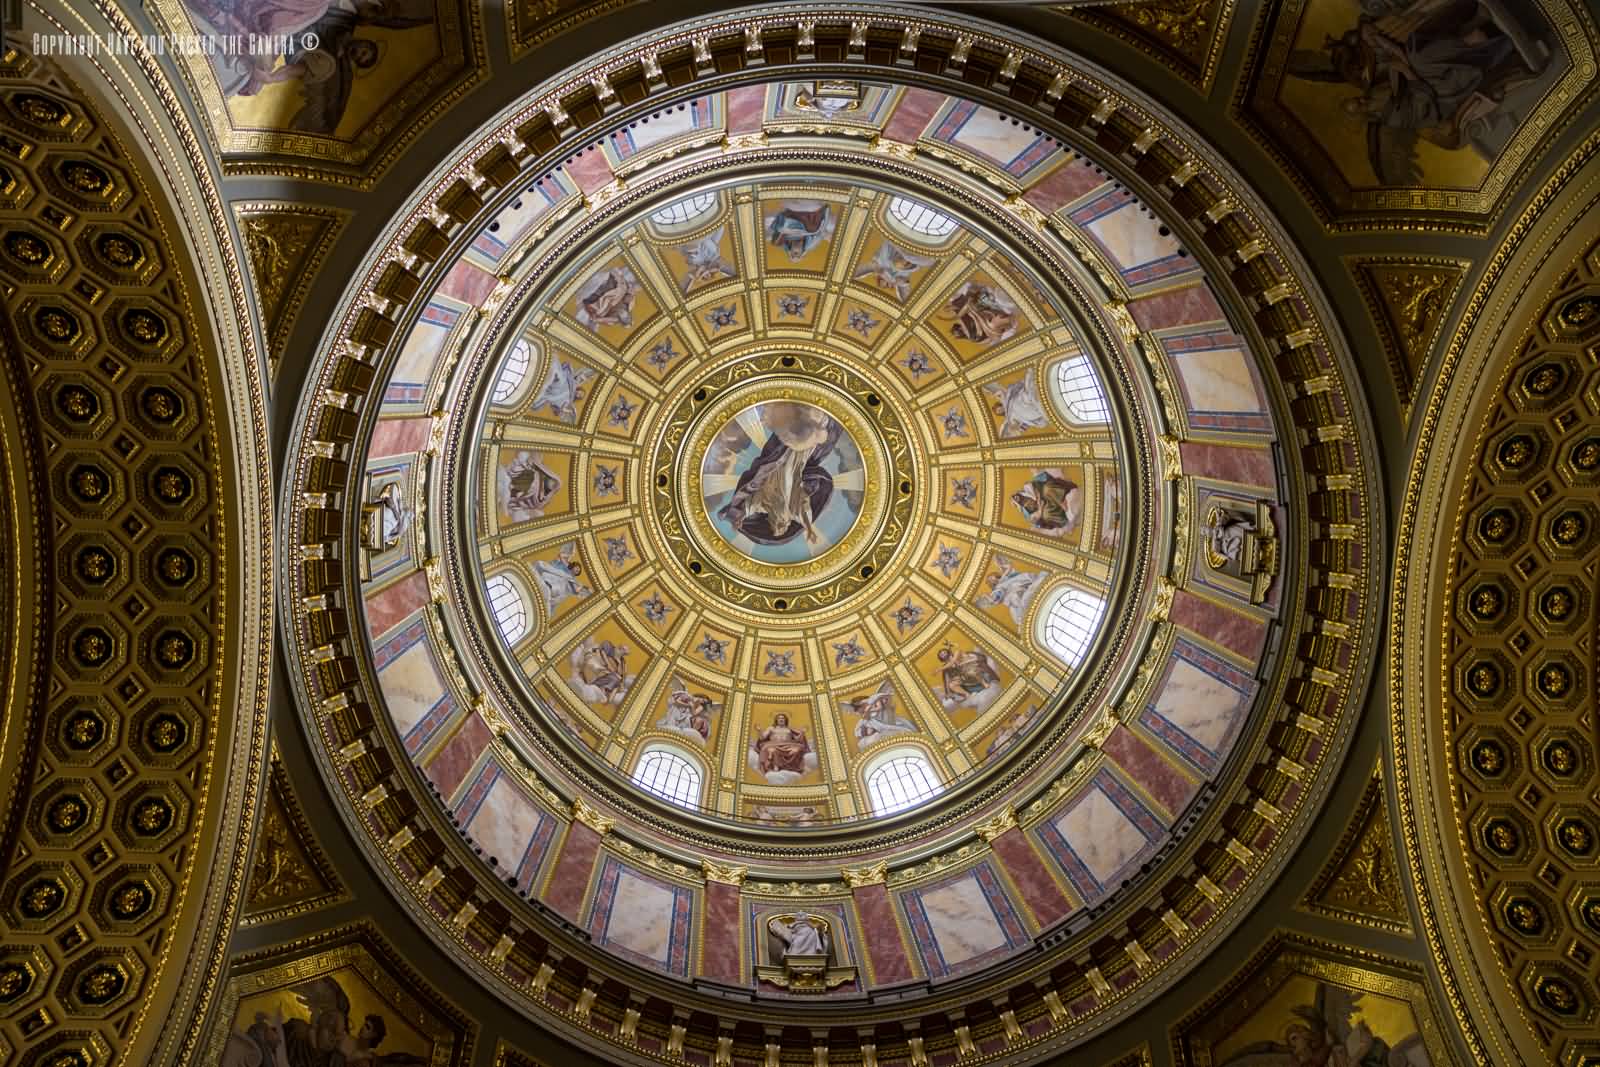 Beautiful Artwork Of The Dome Inside St. Stephen's Basilica